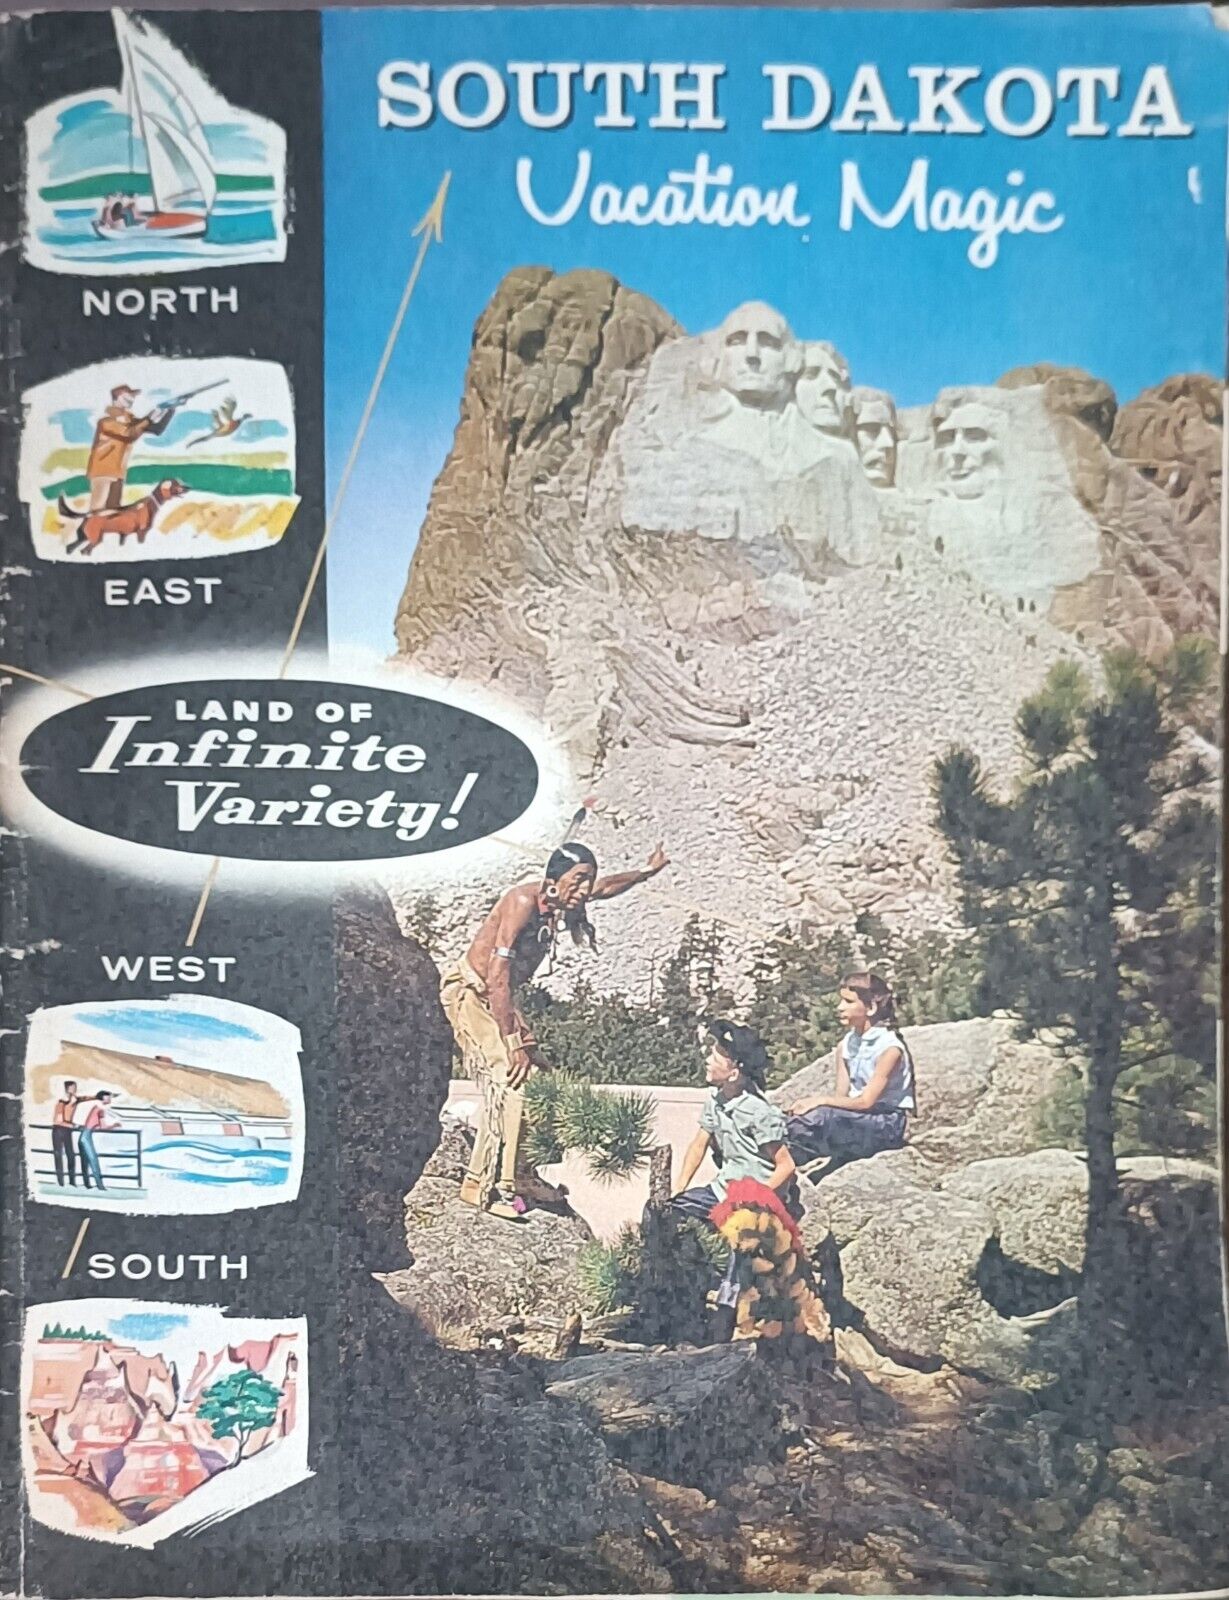 1960s South Dakota Vacation Magic Vintage Travel Booklet Fishing Rodeo Events SD